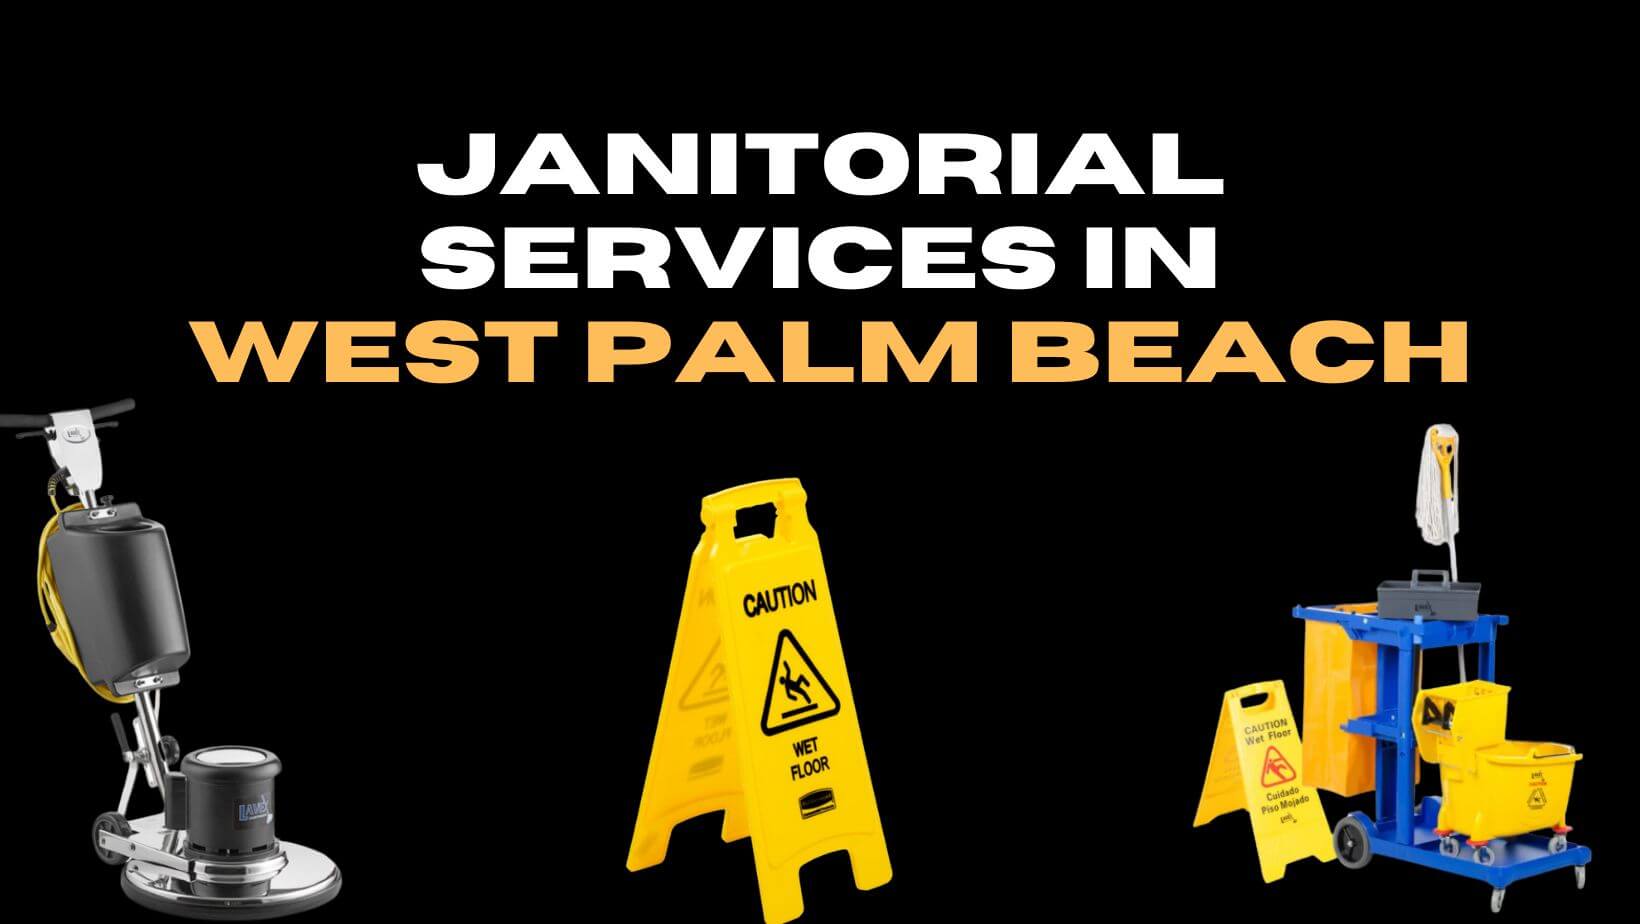 Janitorial services in west palm beach